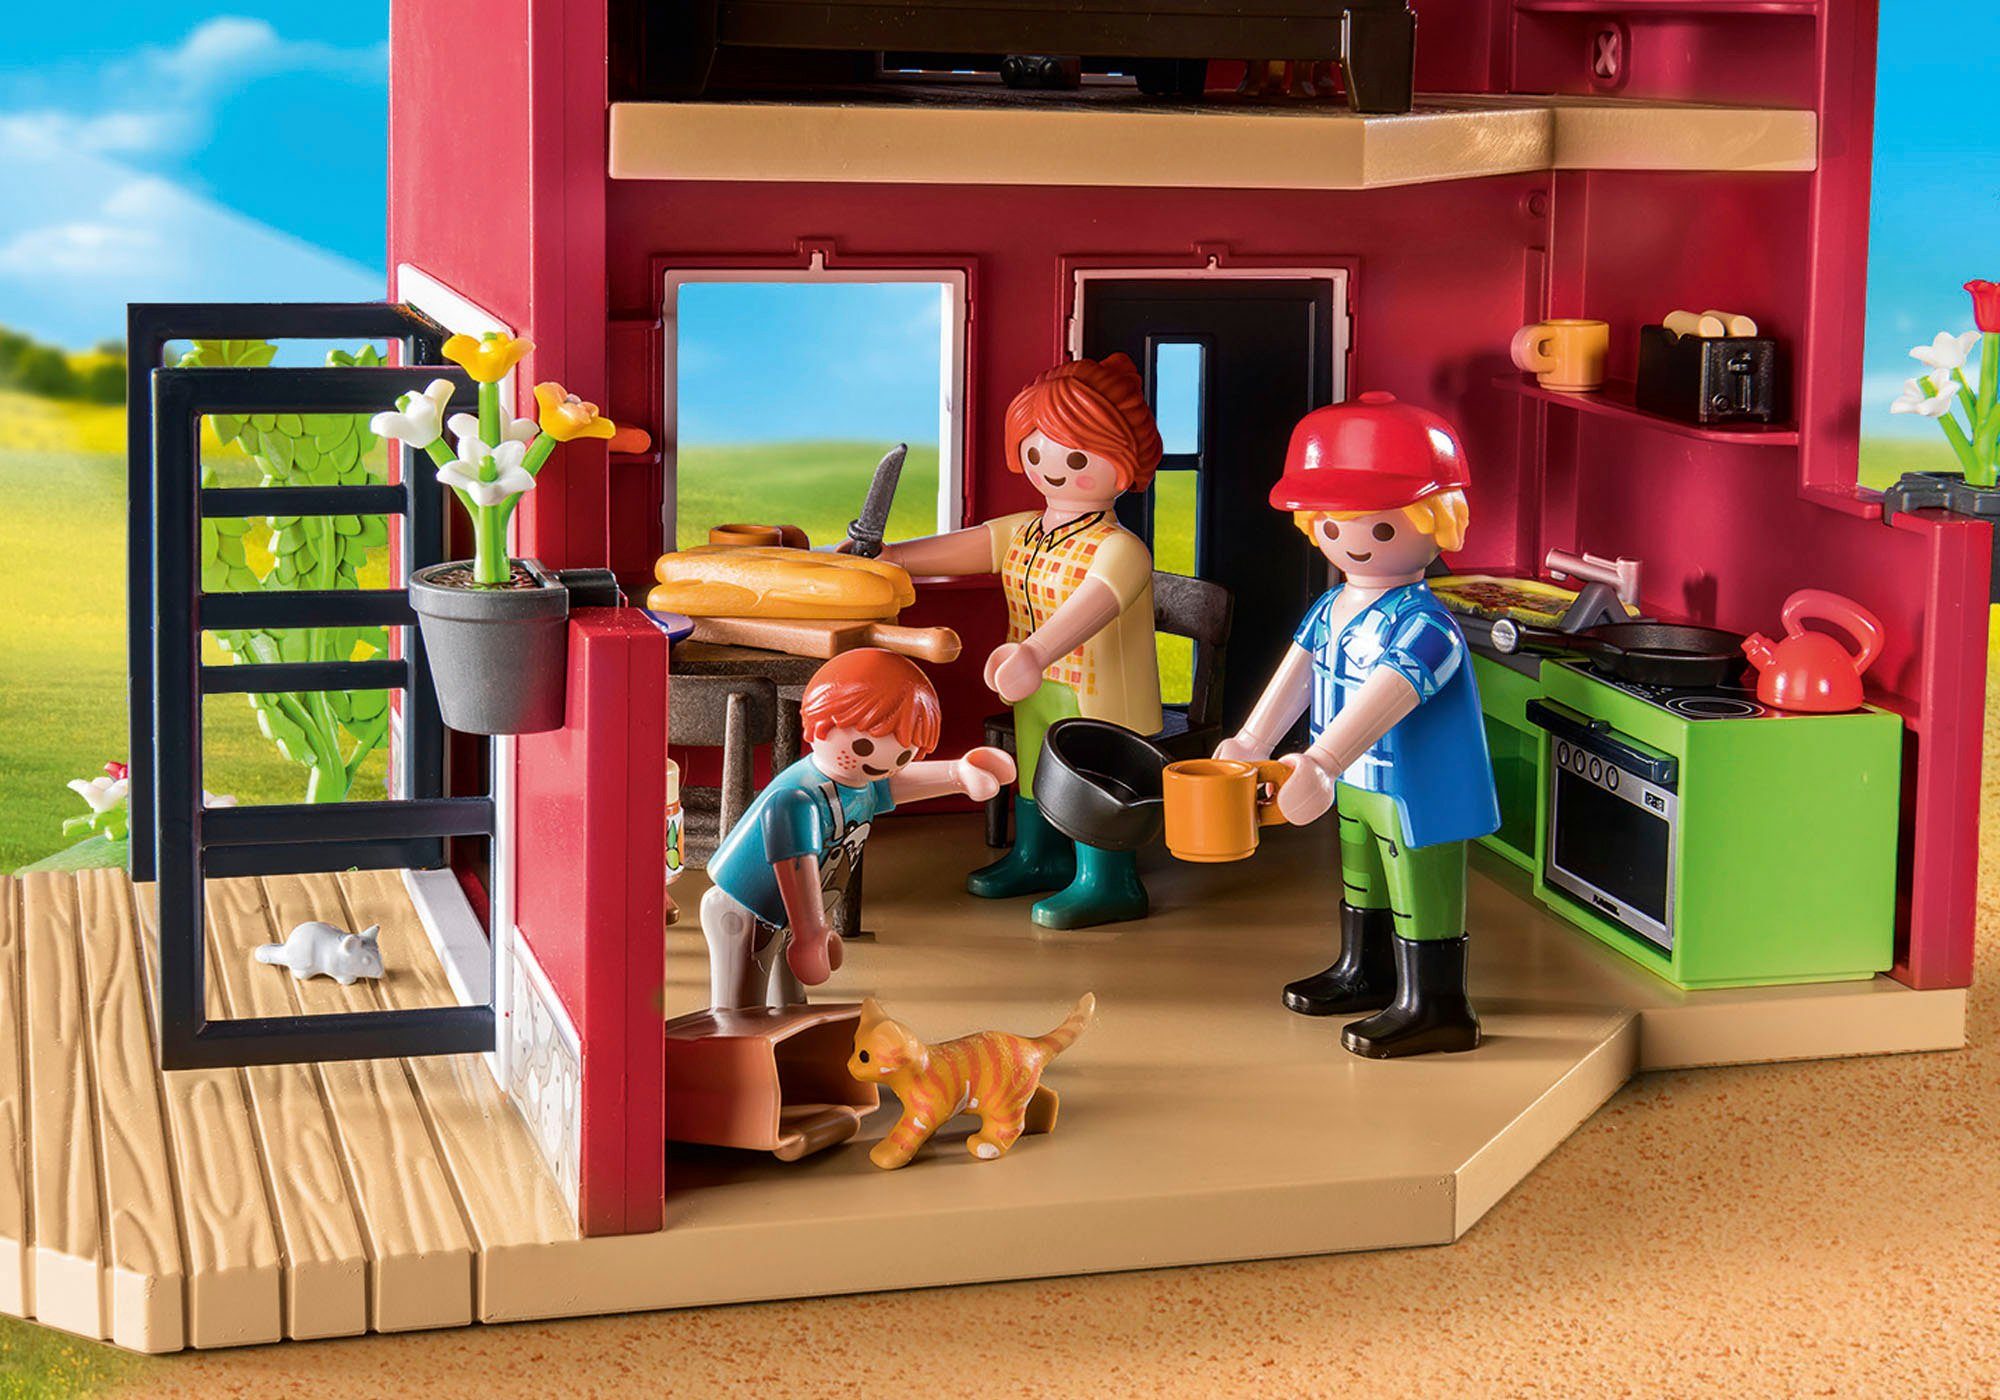 Playmobil® Konstruktions-Spielset Bauernhaus in Made Germany (71248), Country, teilweise aus Material; recyceltem